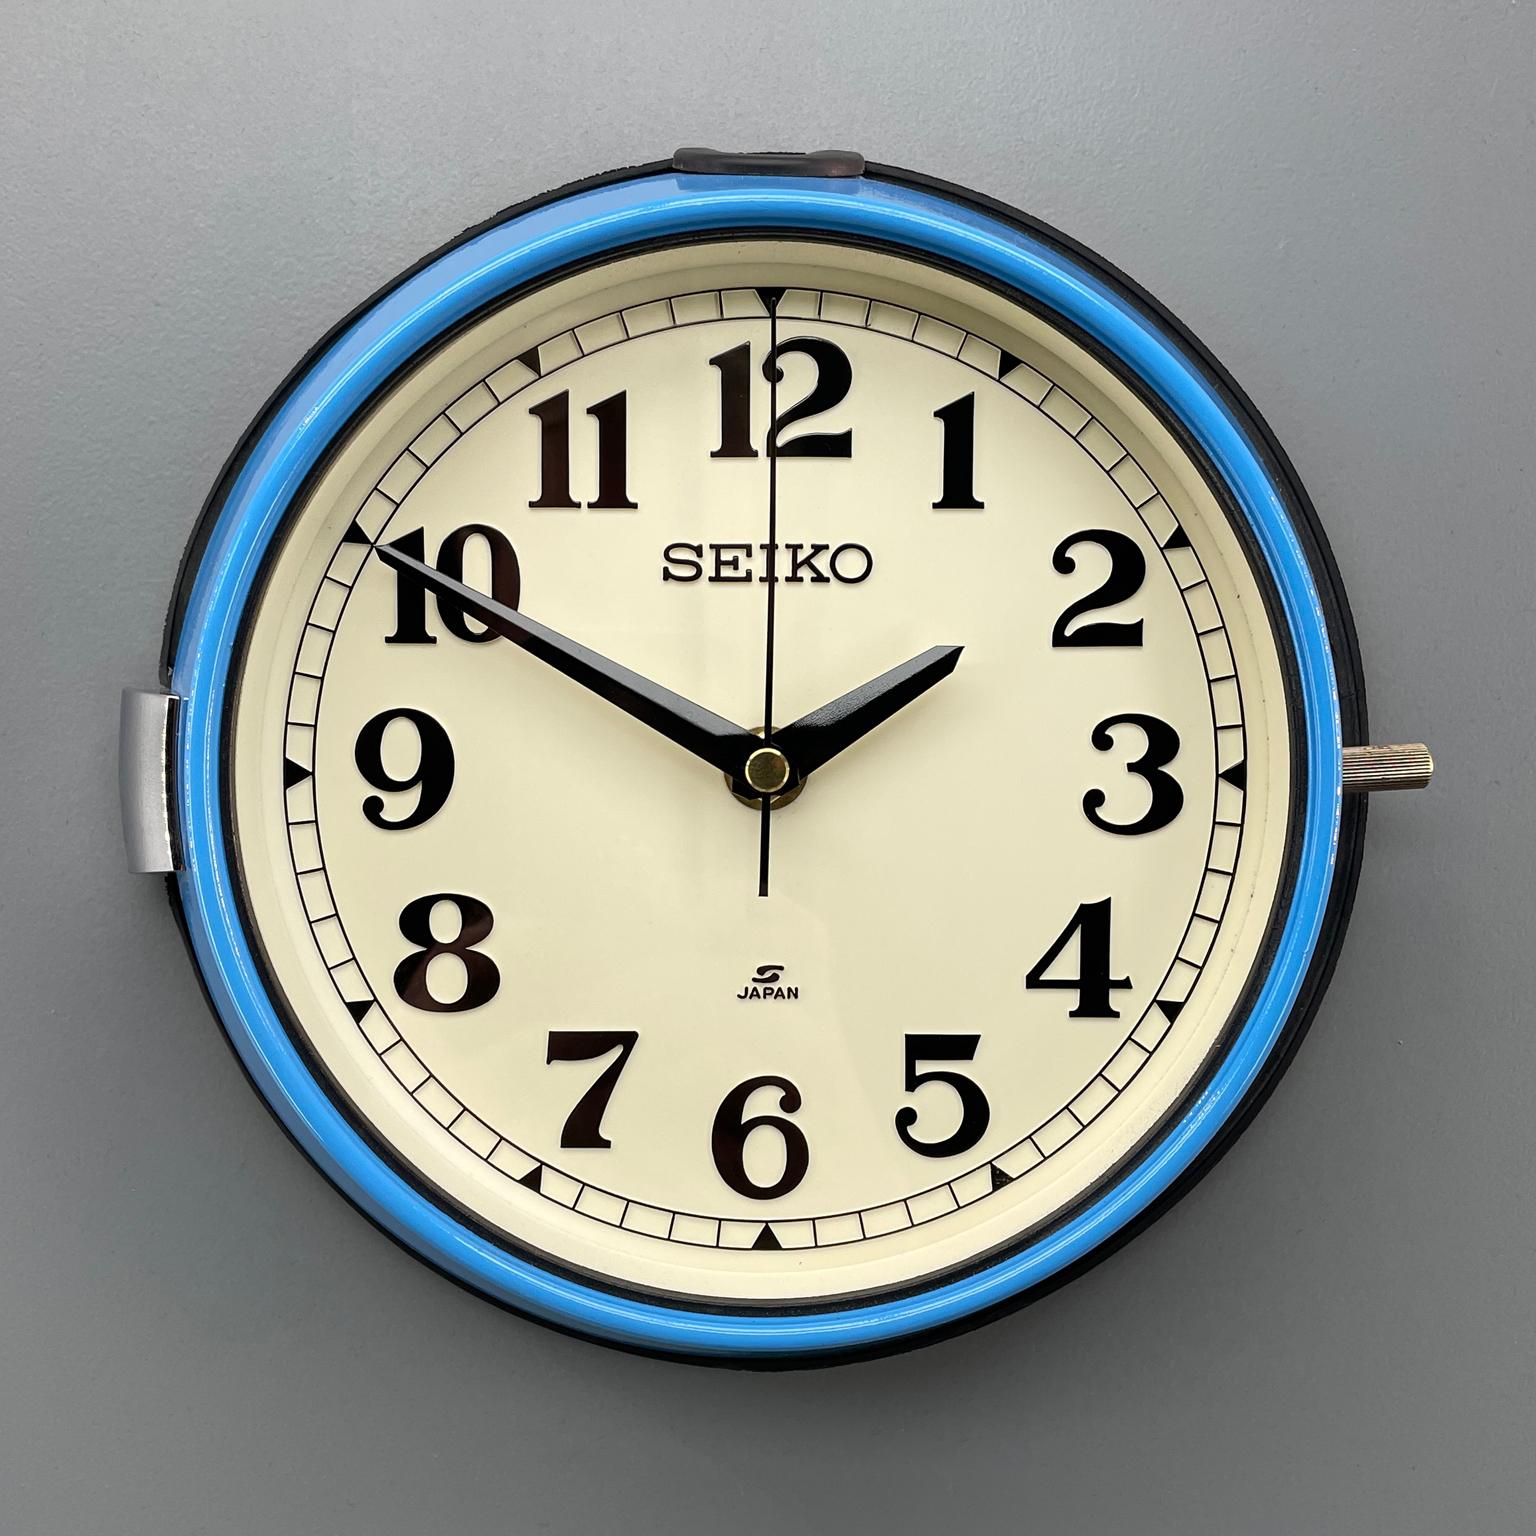 Seiko super tanker slave clock refinished in blue.

A reclaimed and restored maritime slave clock.

These clocks were used in great numbers on super tankers, cargo ships and military vessels built during the 1970s and housed a movement that